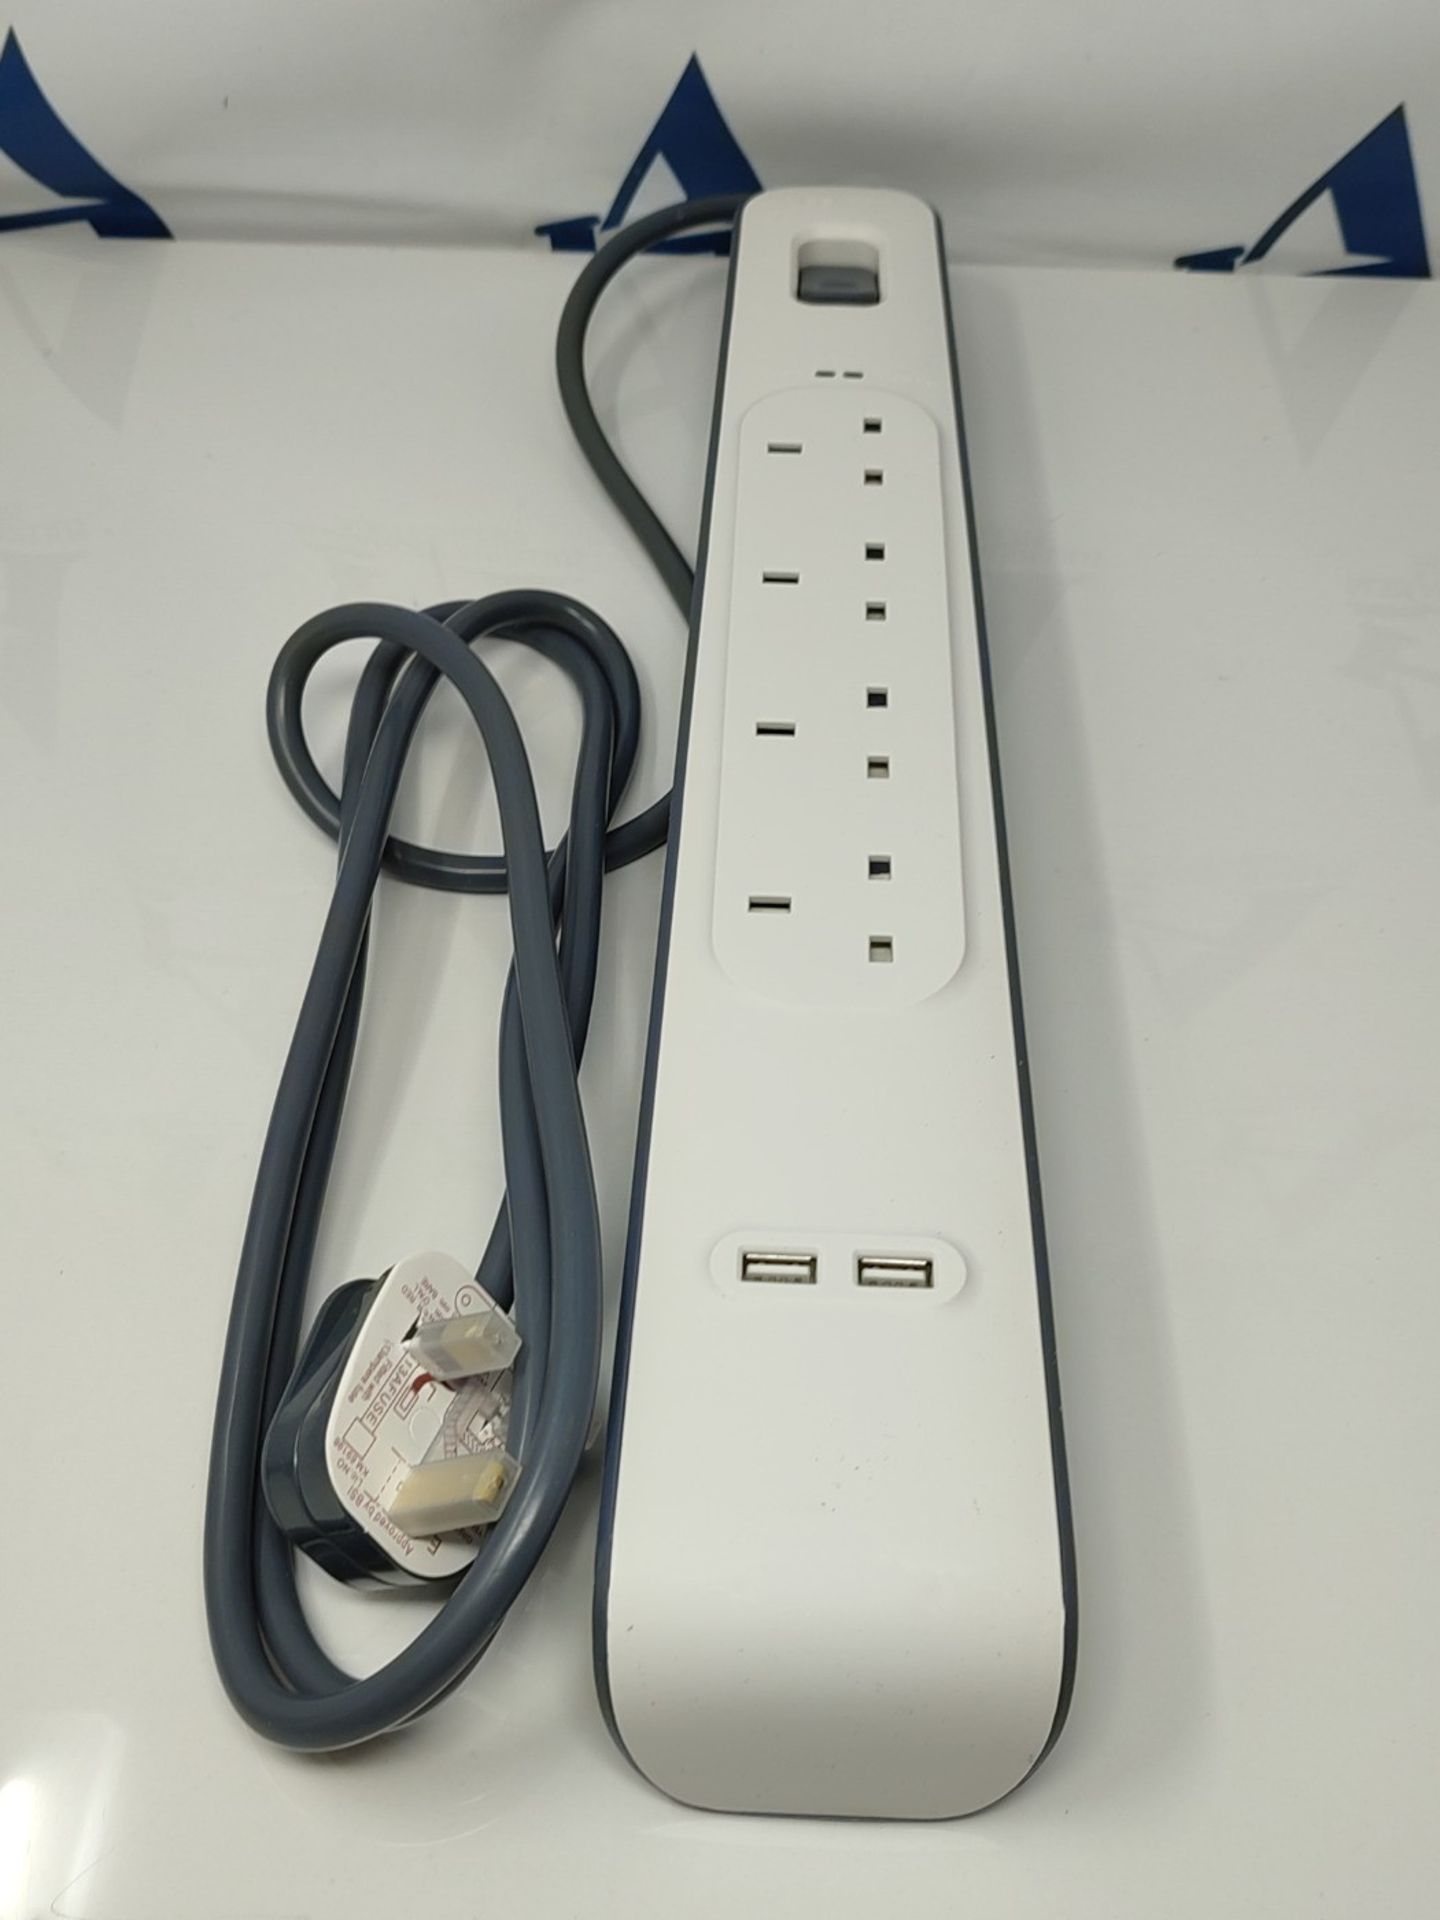 Belkin Extension Lead with USB Slots x 2 (2.4 A Shared), 4 Way/4 Plug Extension, 2m Su - Image 2 of 2